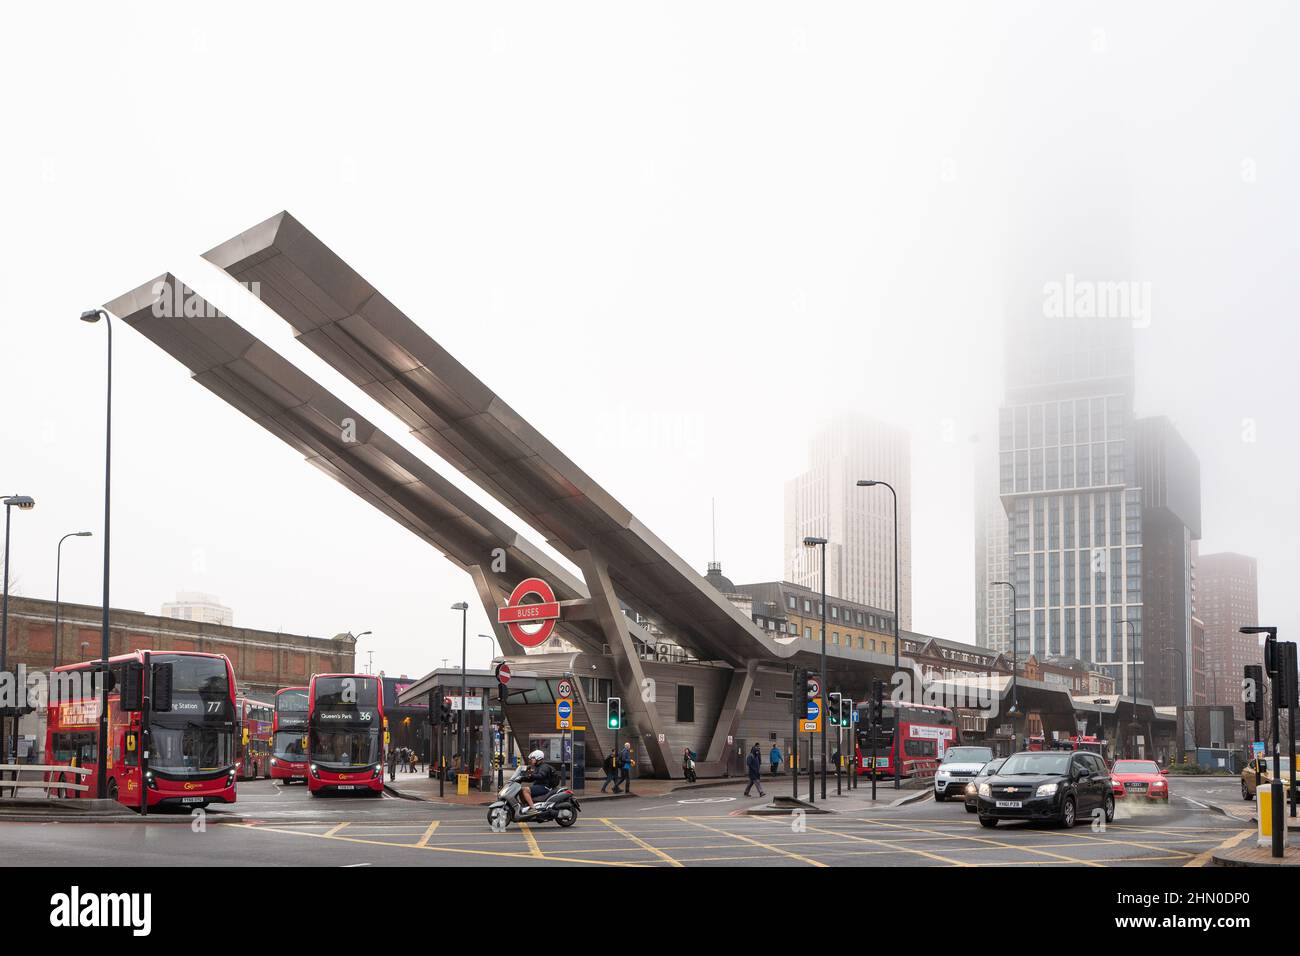 Vauxhall bus station London on a damp and misty morning. Vauxhall bus station is adjacent to Vauxhall Bridge on the River Thames Stock Photo